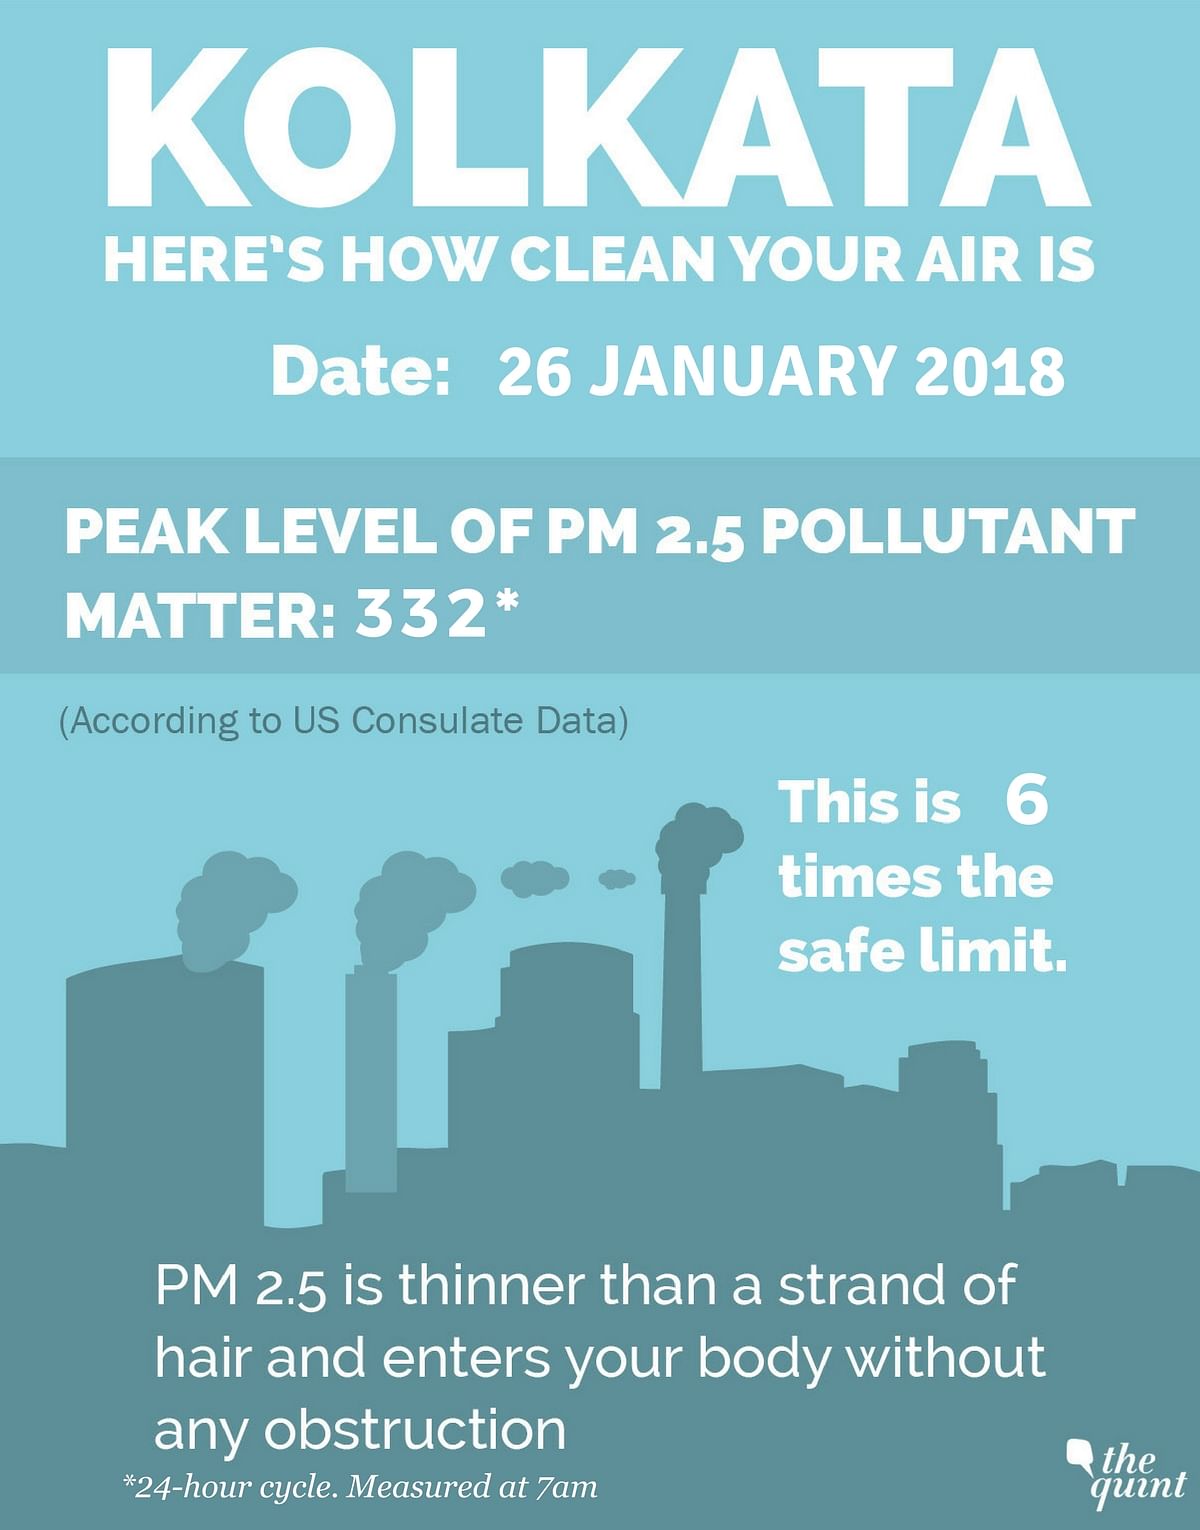 A daily update on the city’s pollution levels. So that you can go out prepared.